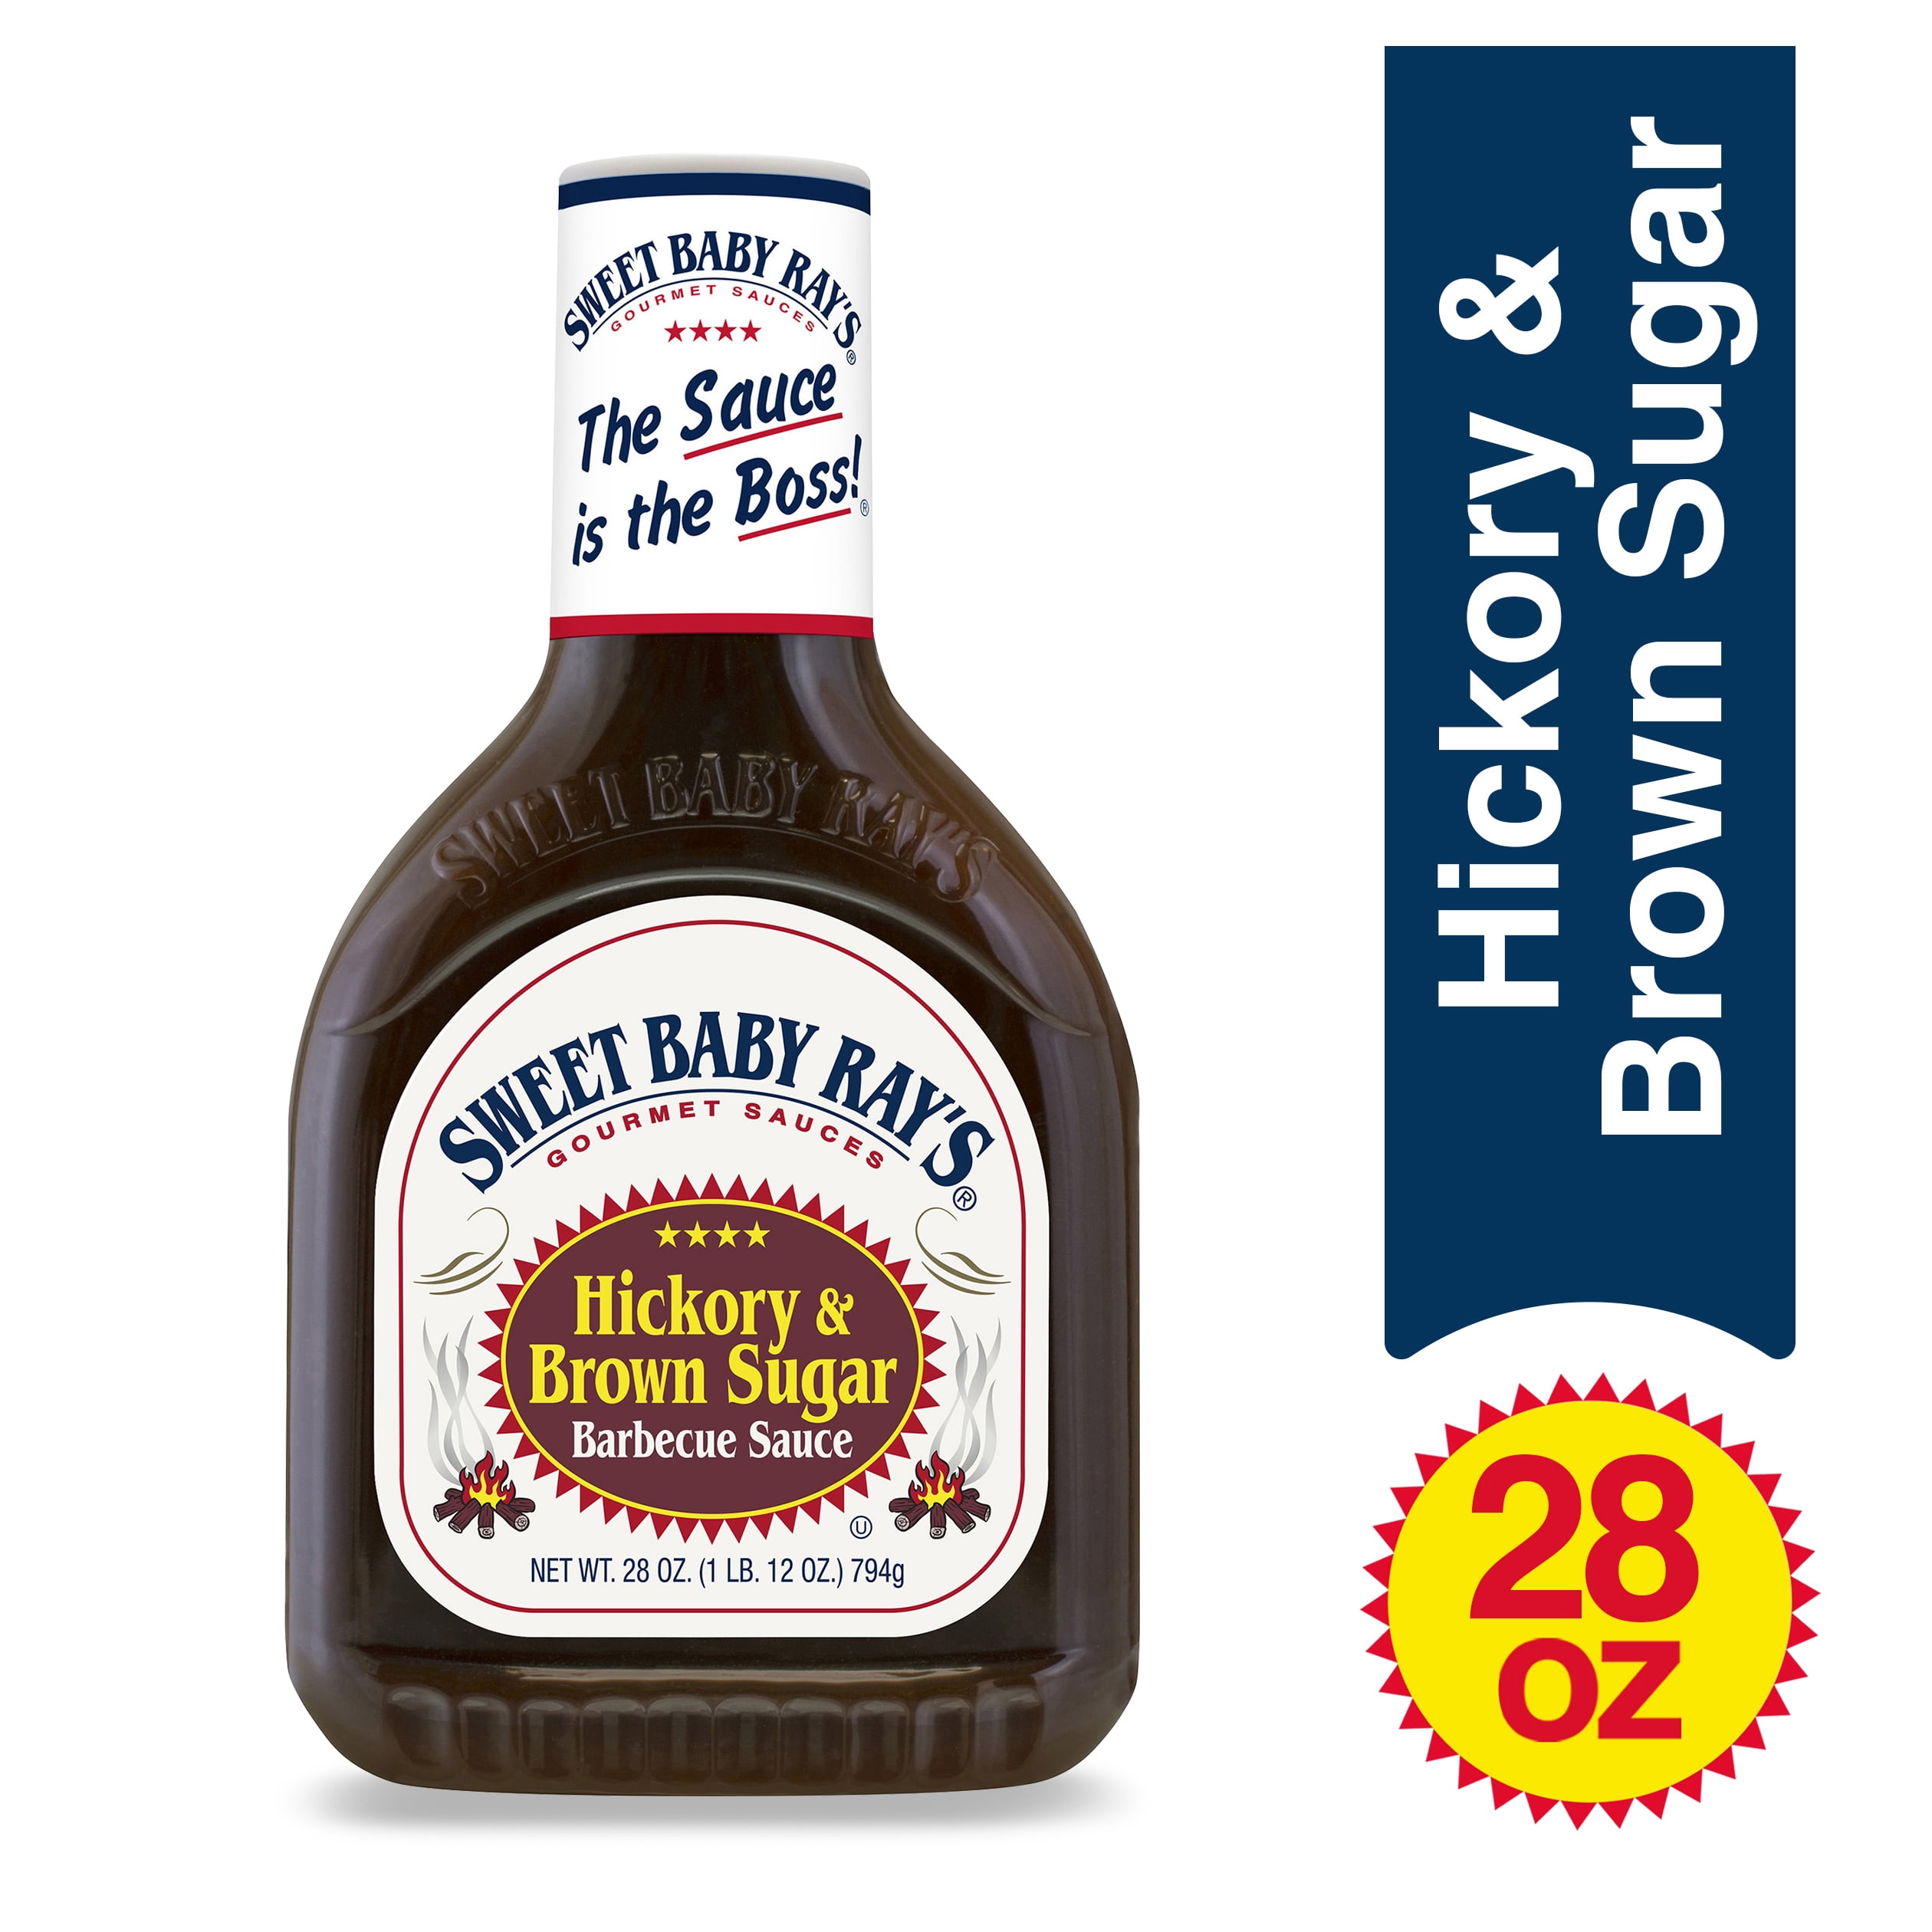 Sweet Baby Ray's Hickory & Brown Sugar Barbecue Sauce, 28 oz.